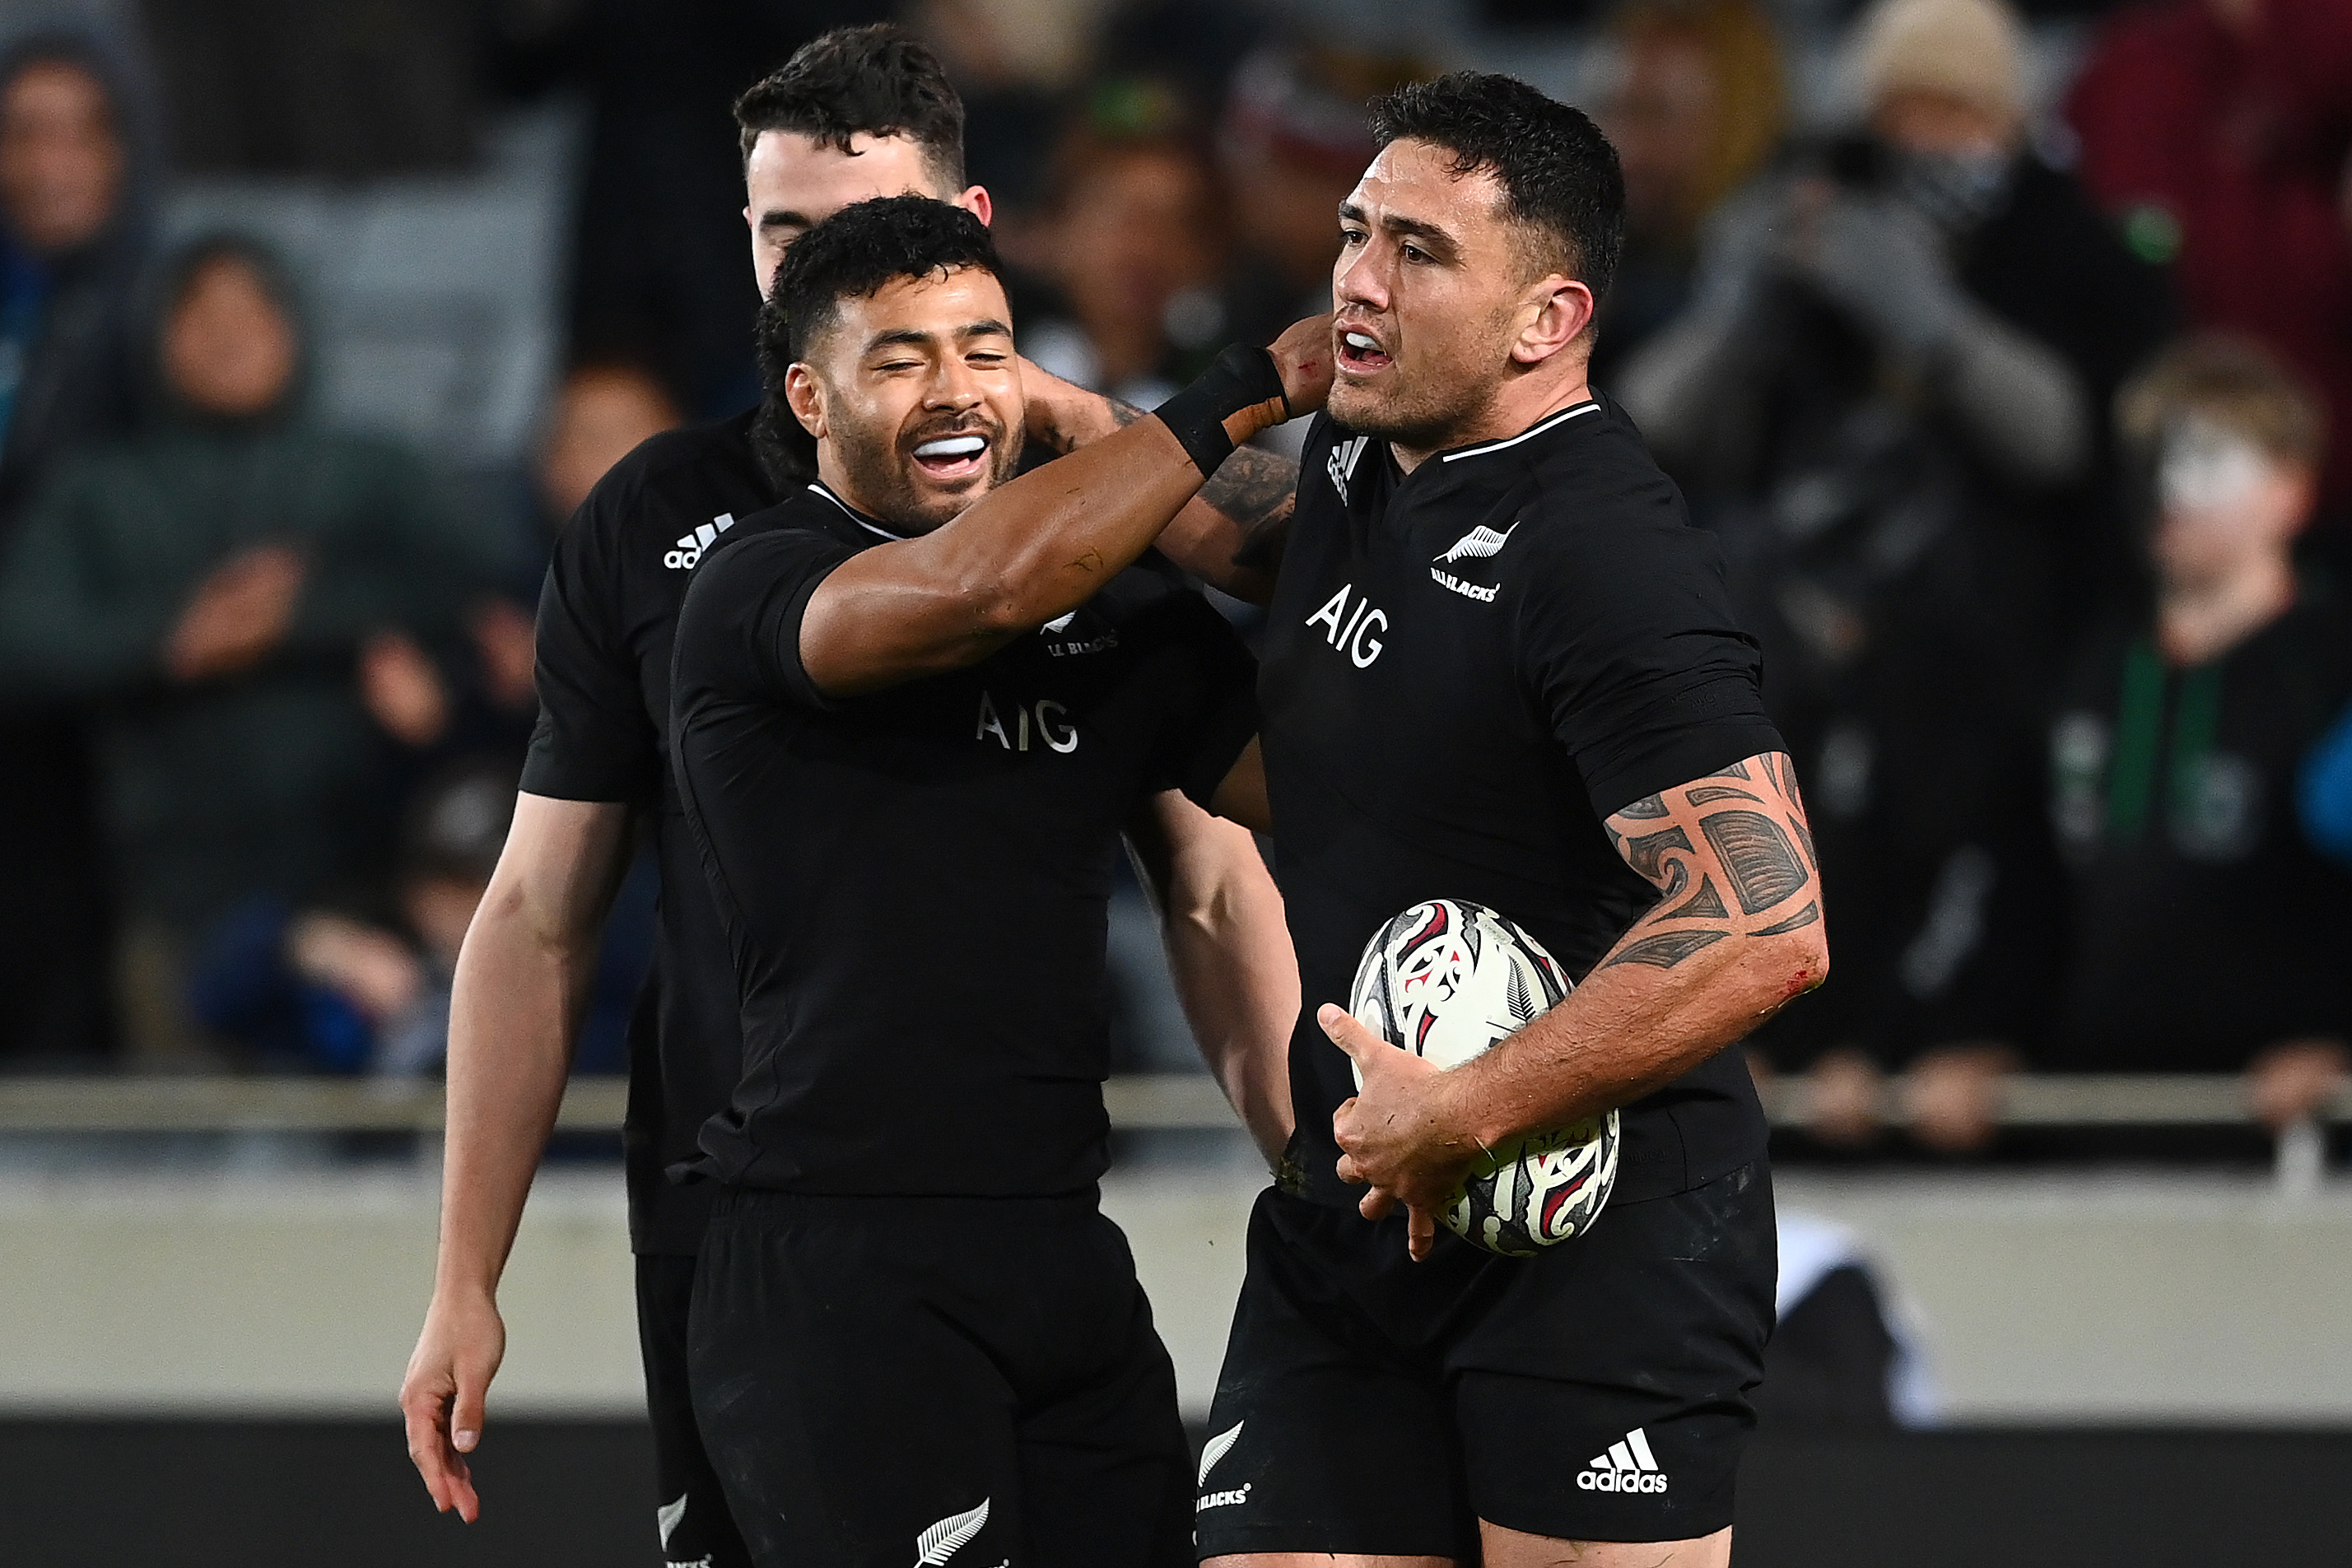 All Blacks lock-up the Bledisloe Cup for a 19th straight year » allblacks